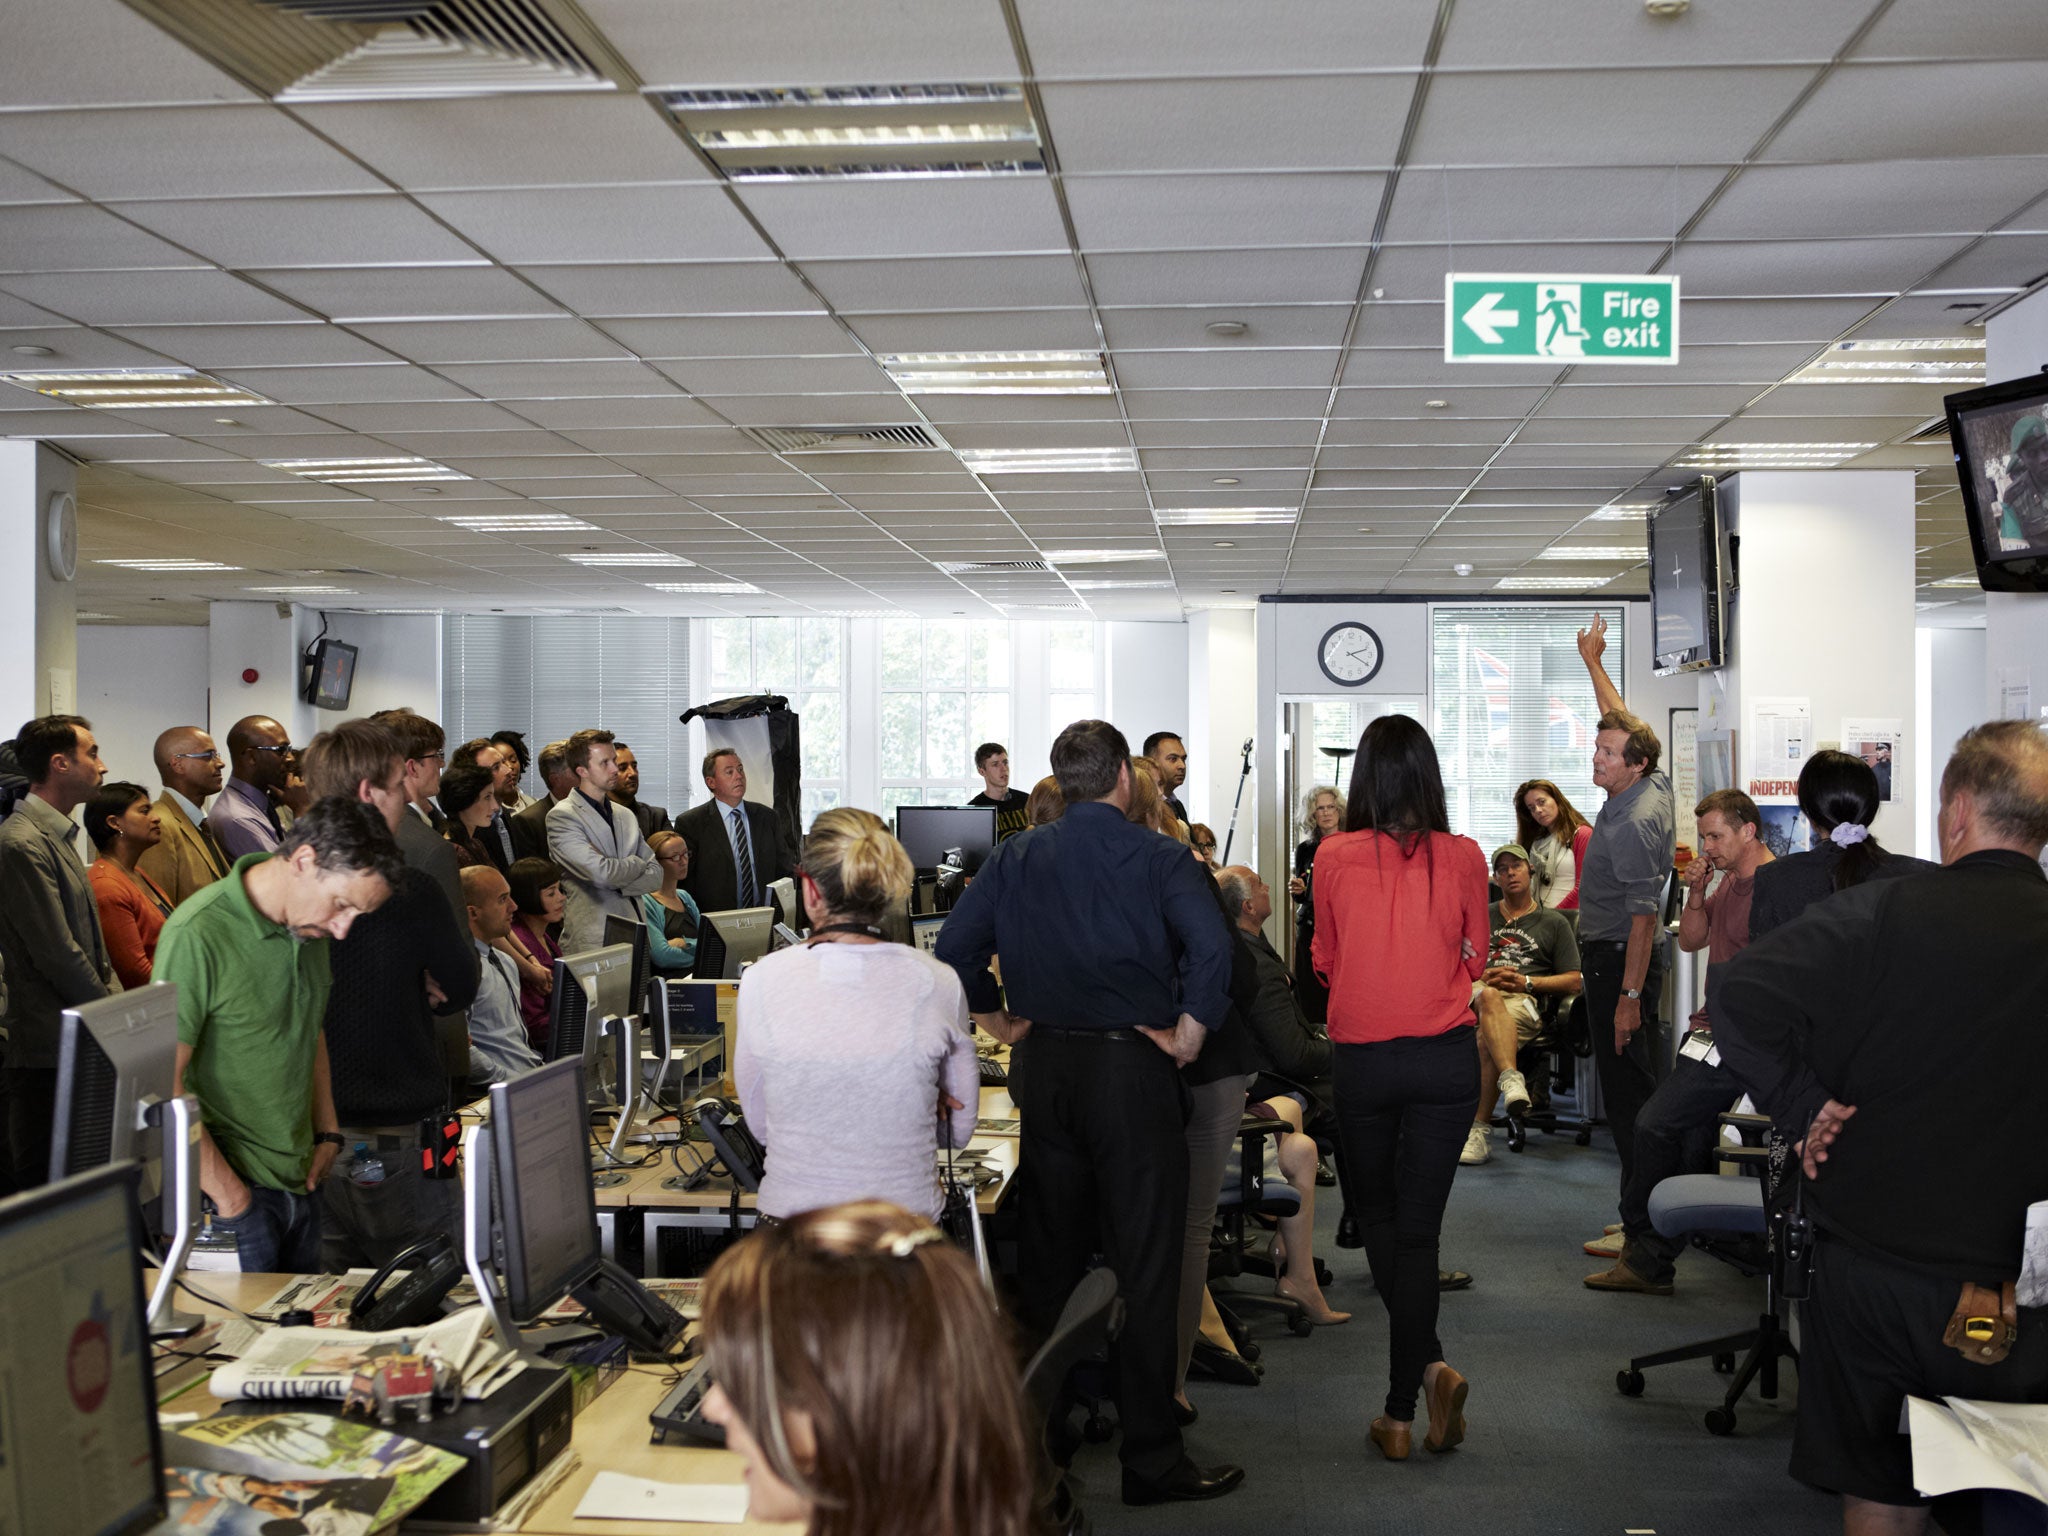 Here is the news: David Hare (arm raised) on set at the Independent offices